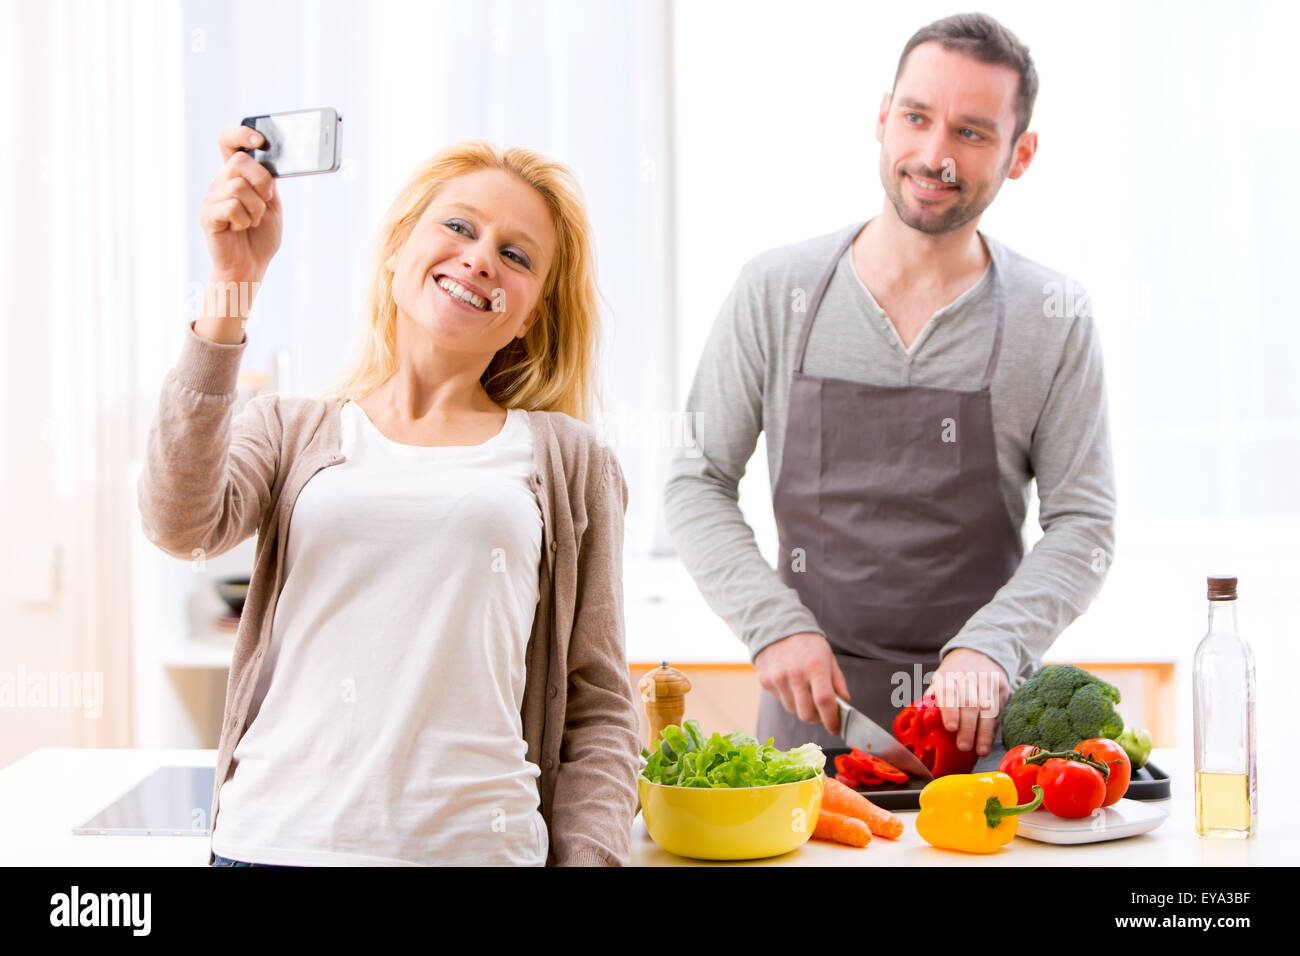 View of a Young attractive woman taking selfie in kitchen Stock Photo